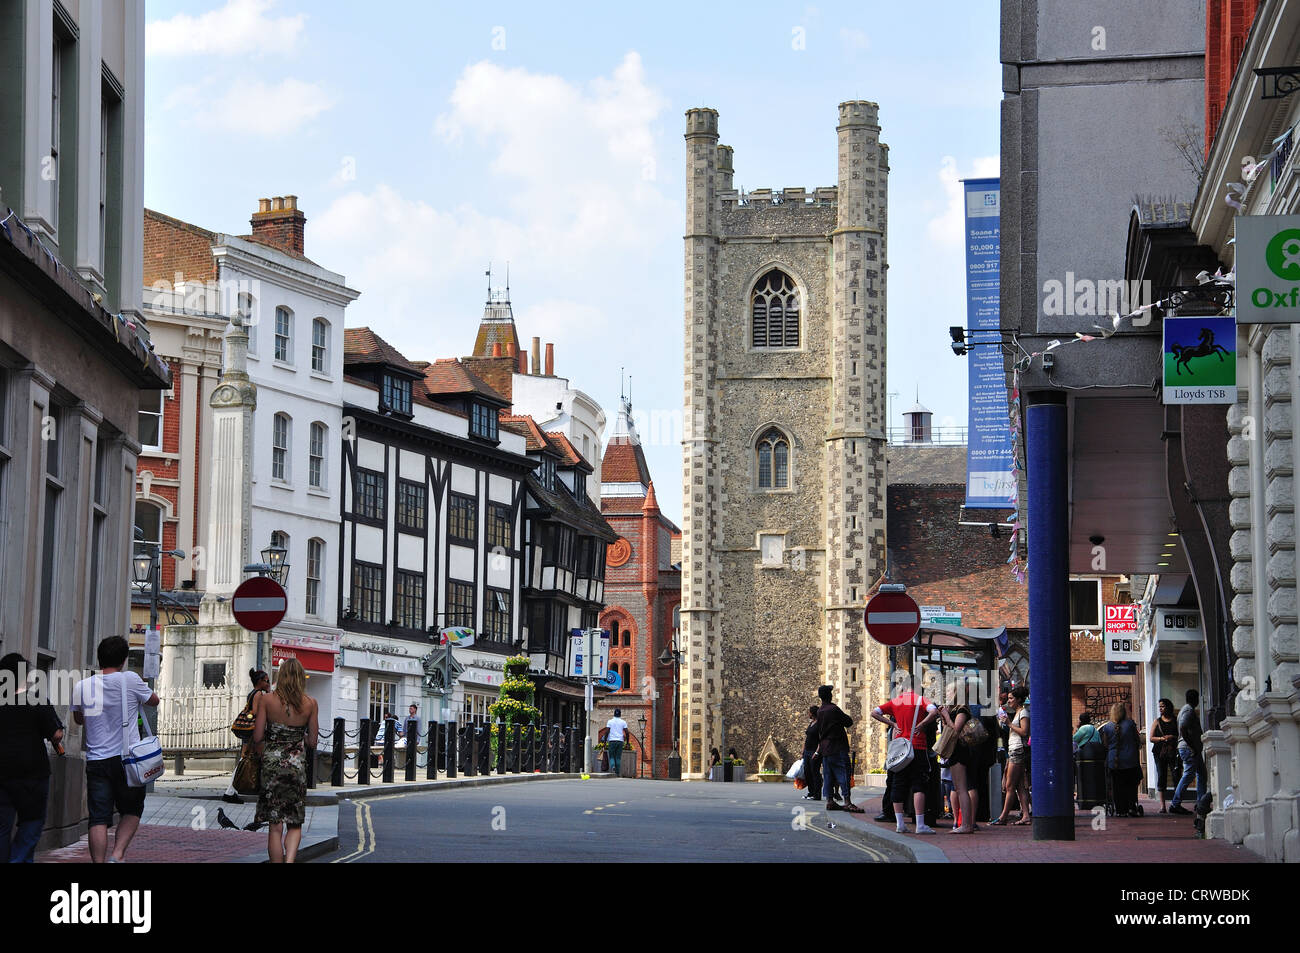 Market Place showing St Lawrence's Church Tower, High Street, Reading, Berkshire, England, United Kingdom Stock Photo